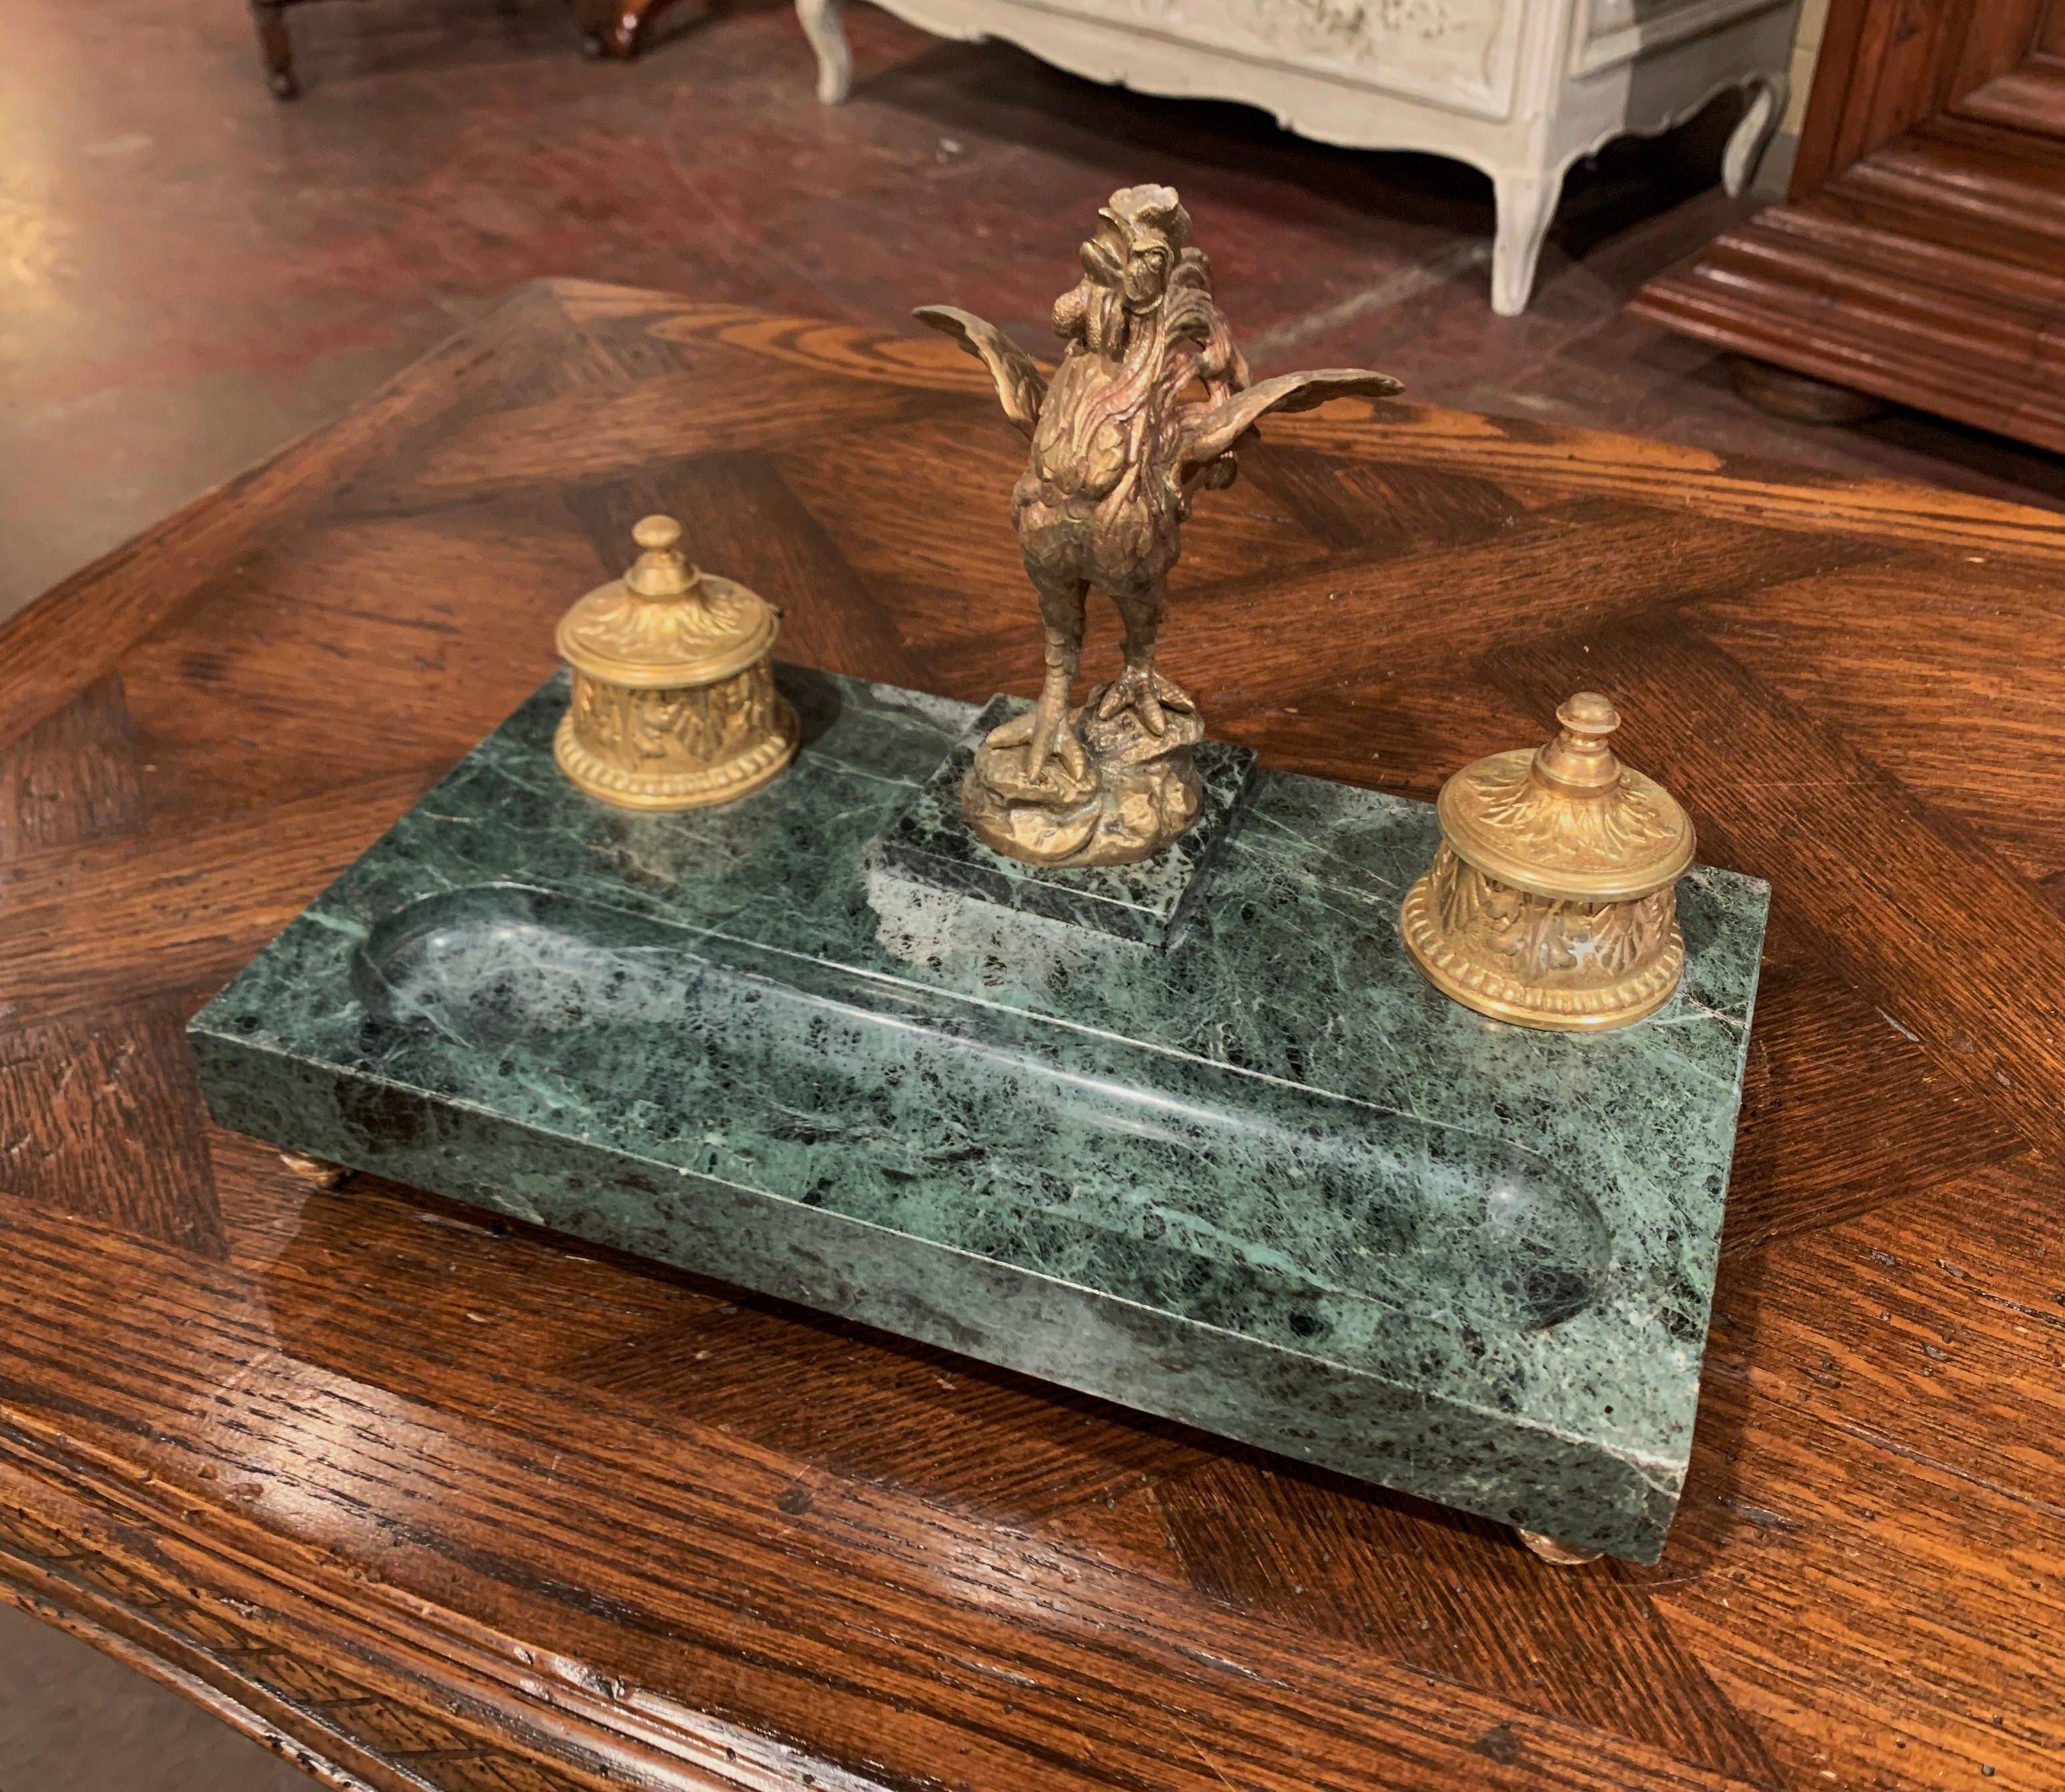 Decorate your desk or study with this elegant antique inkwell, crafted in France, circa 1880, and situated on a rectangular green marble base, the desk accessory features a bronze rooster standing on a small square base. The bird figure with